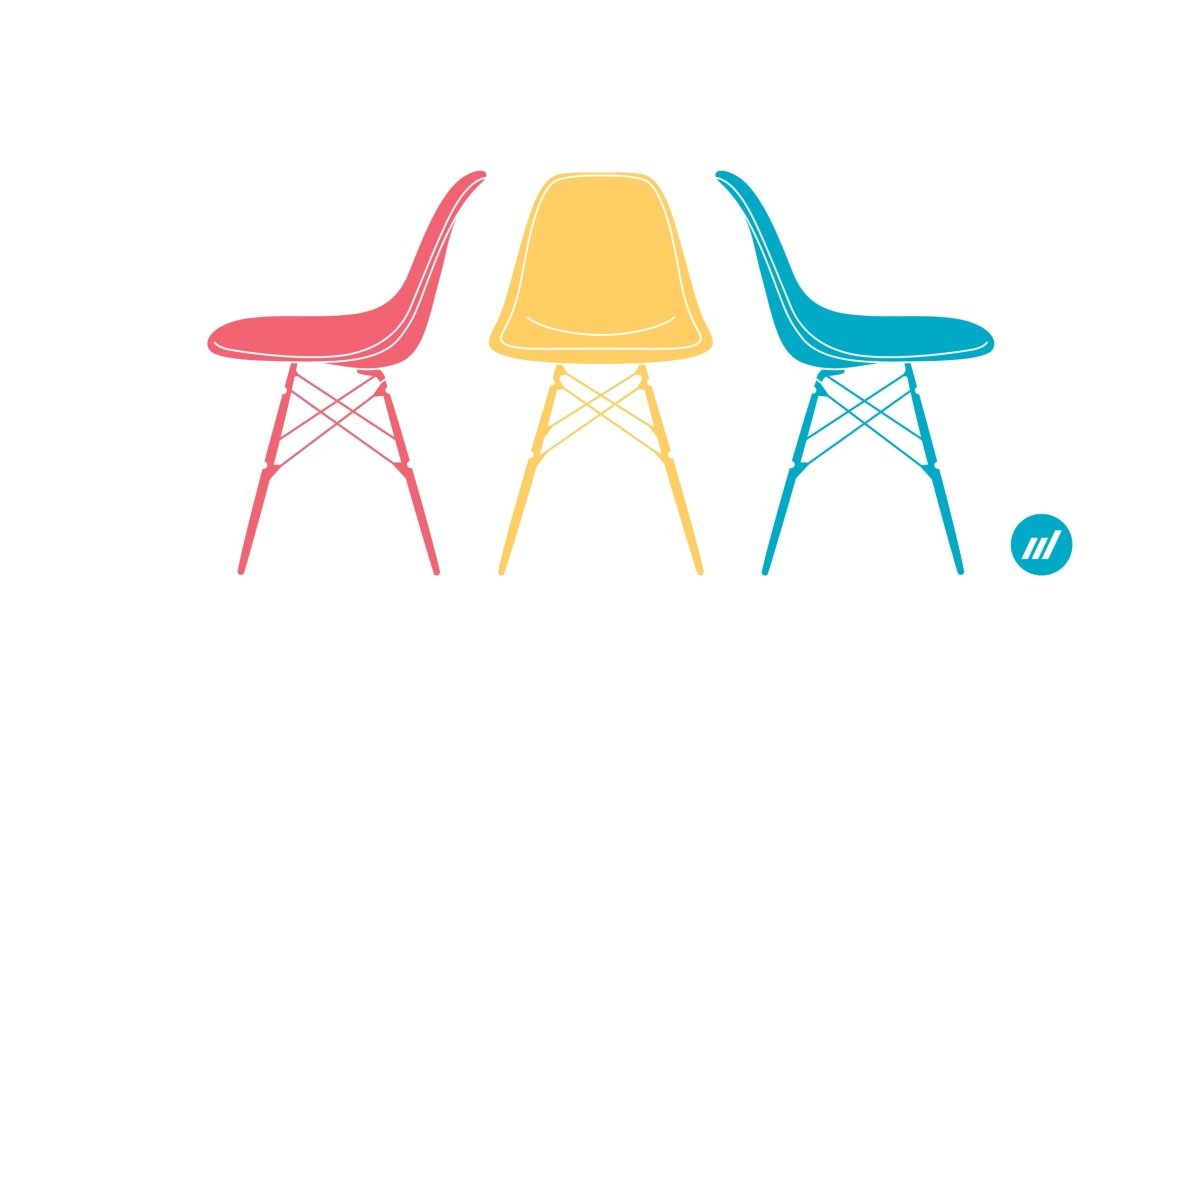 Chairs Print - Modernica Chairs Print - By Autotype